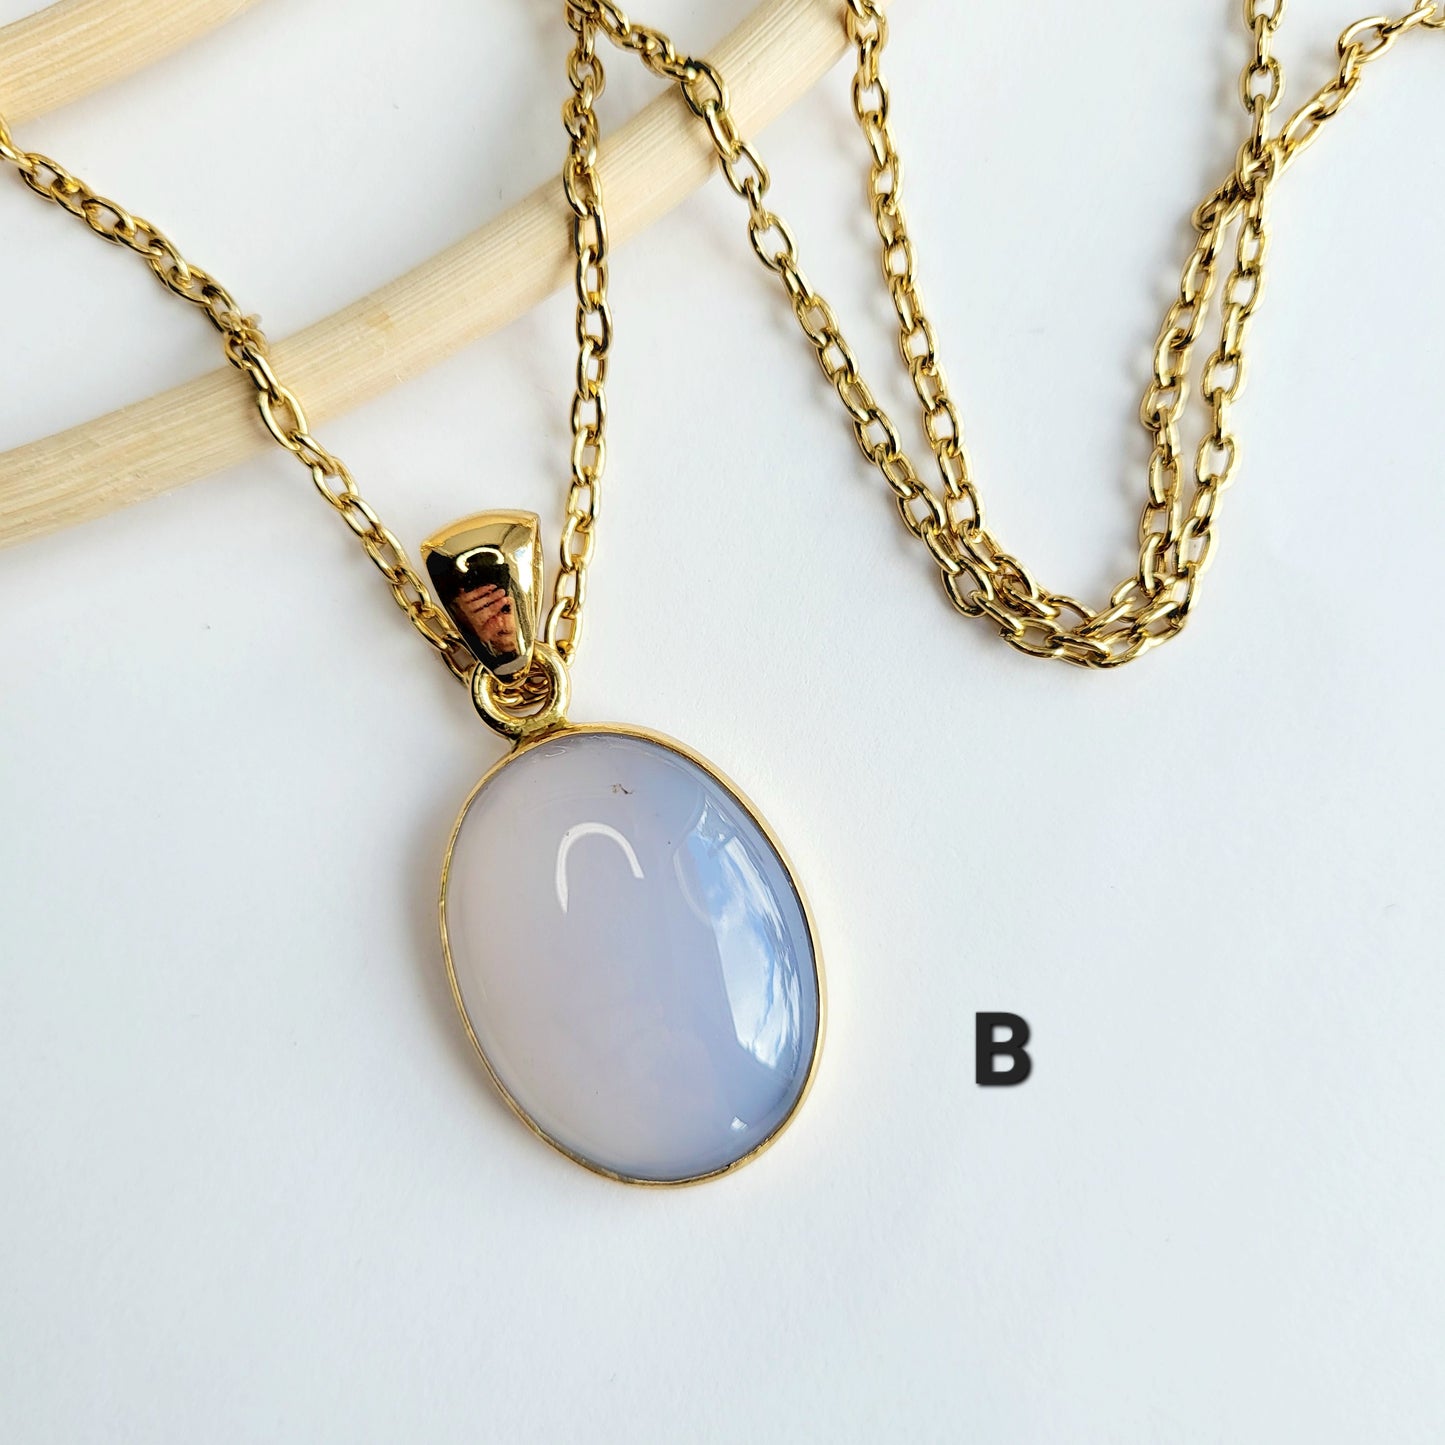 Load image into Gallery viewer, Blue Chalcedony Pendant - Alchemia
